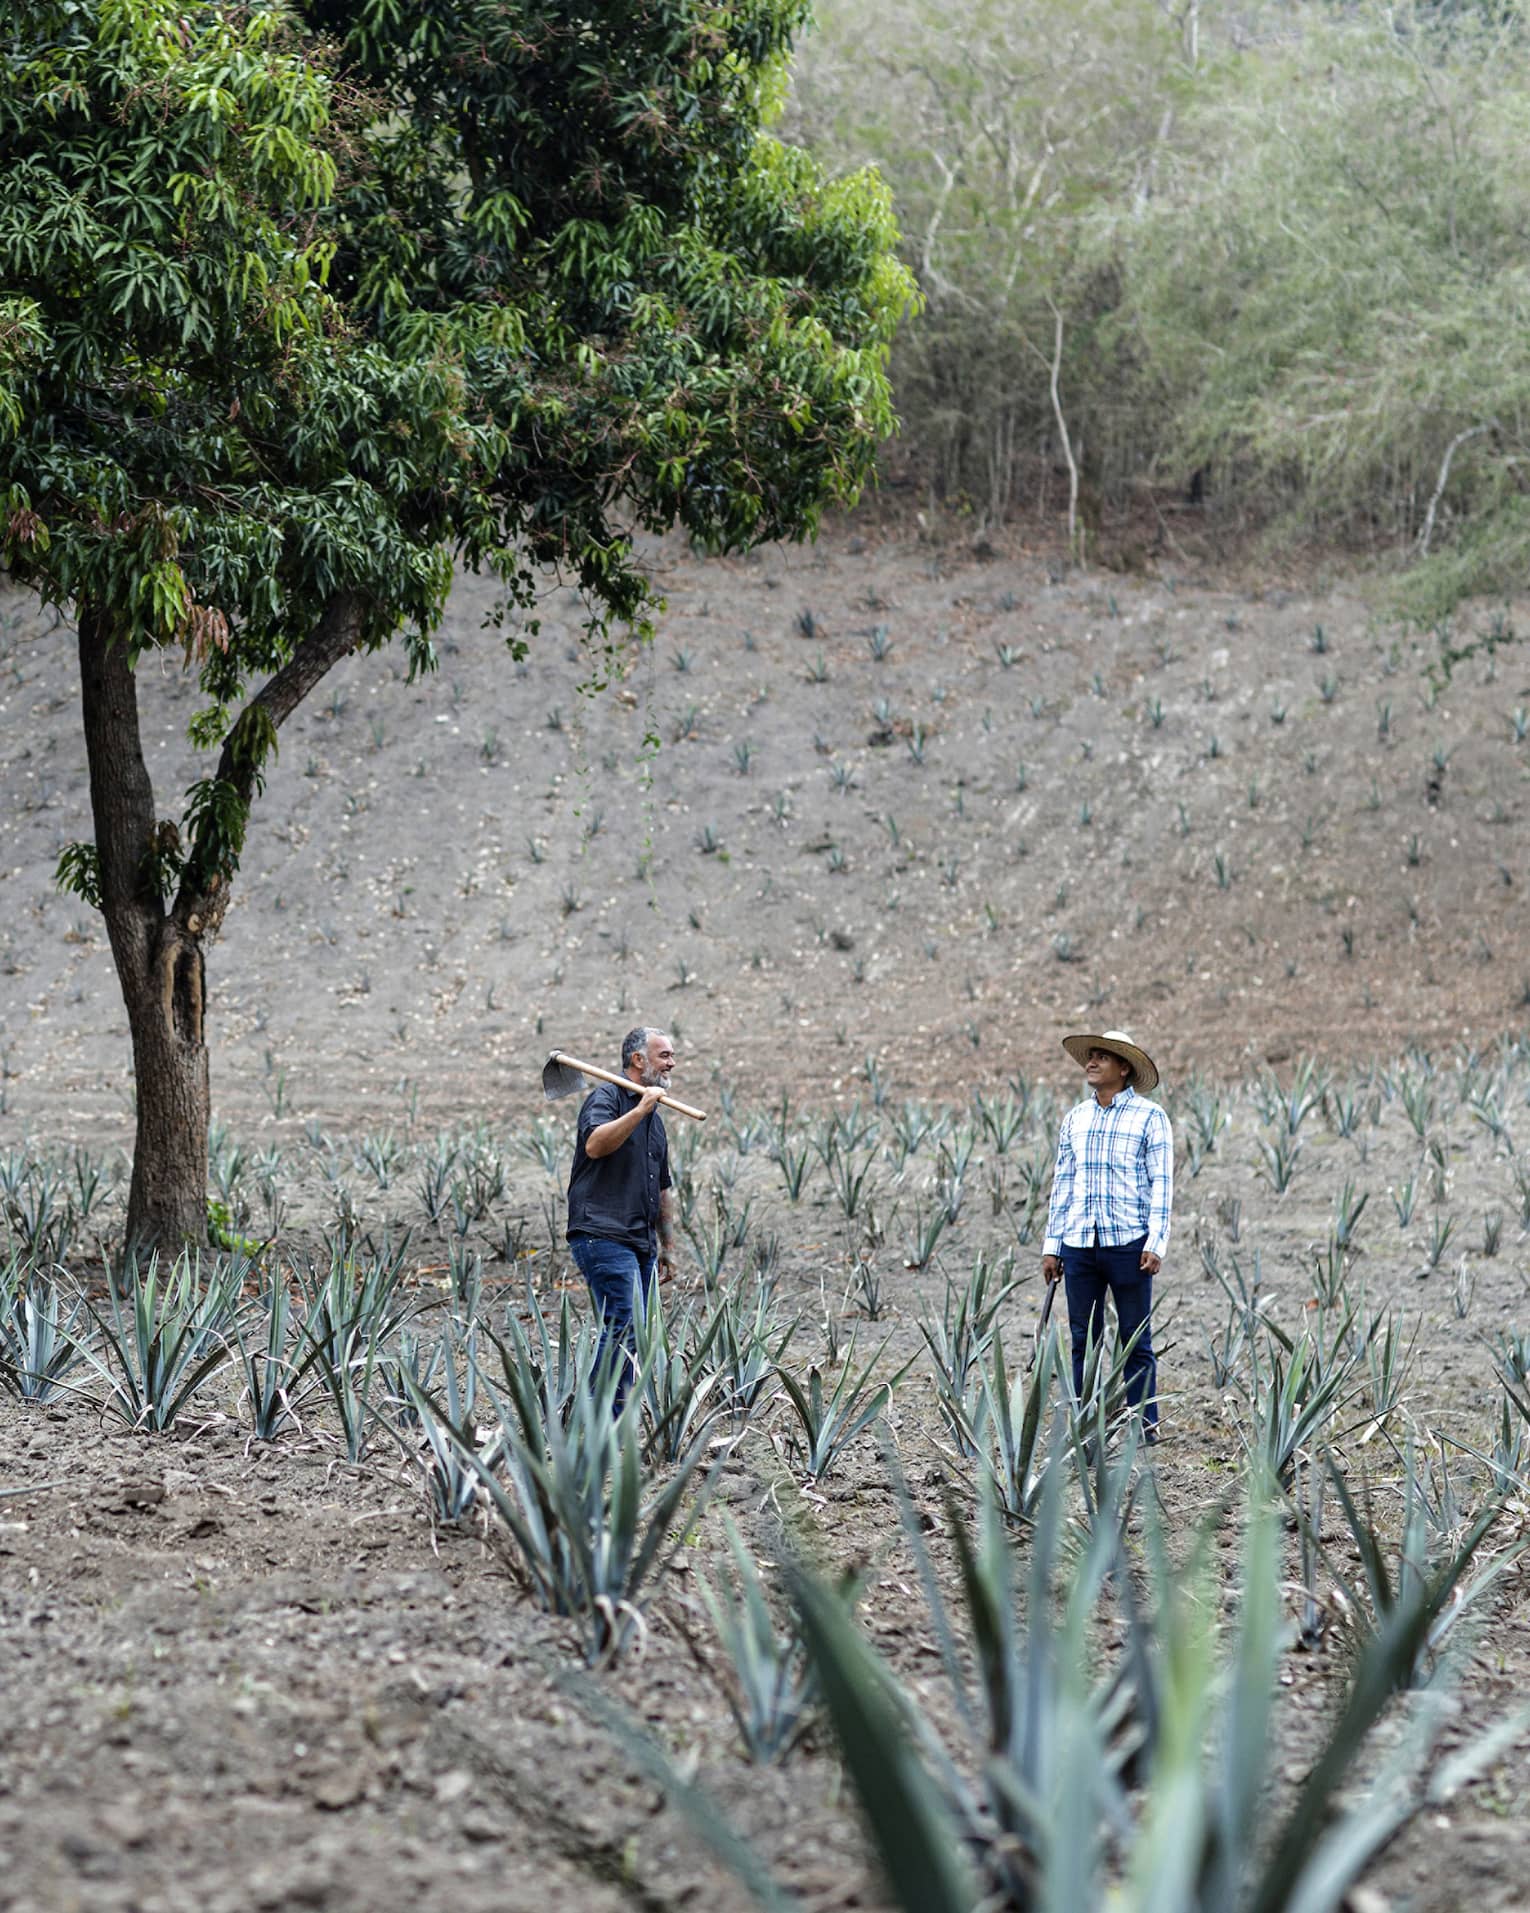 This image depicts two farmers standing in an on-resort Agave Azul farm, and is connected to ESG and sustainability